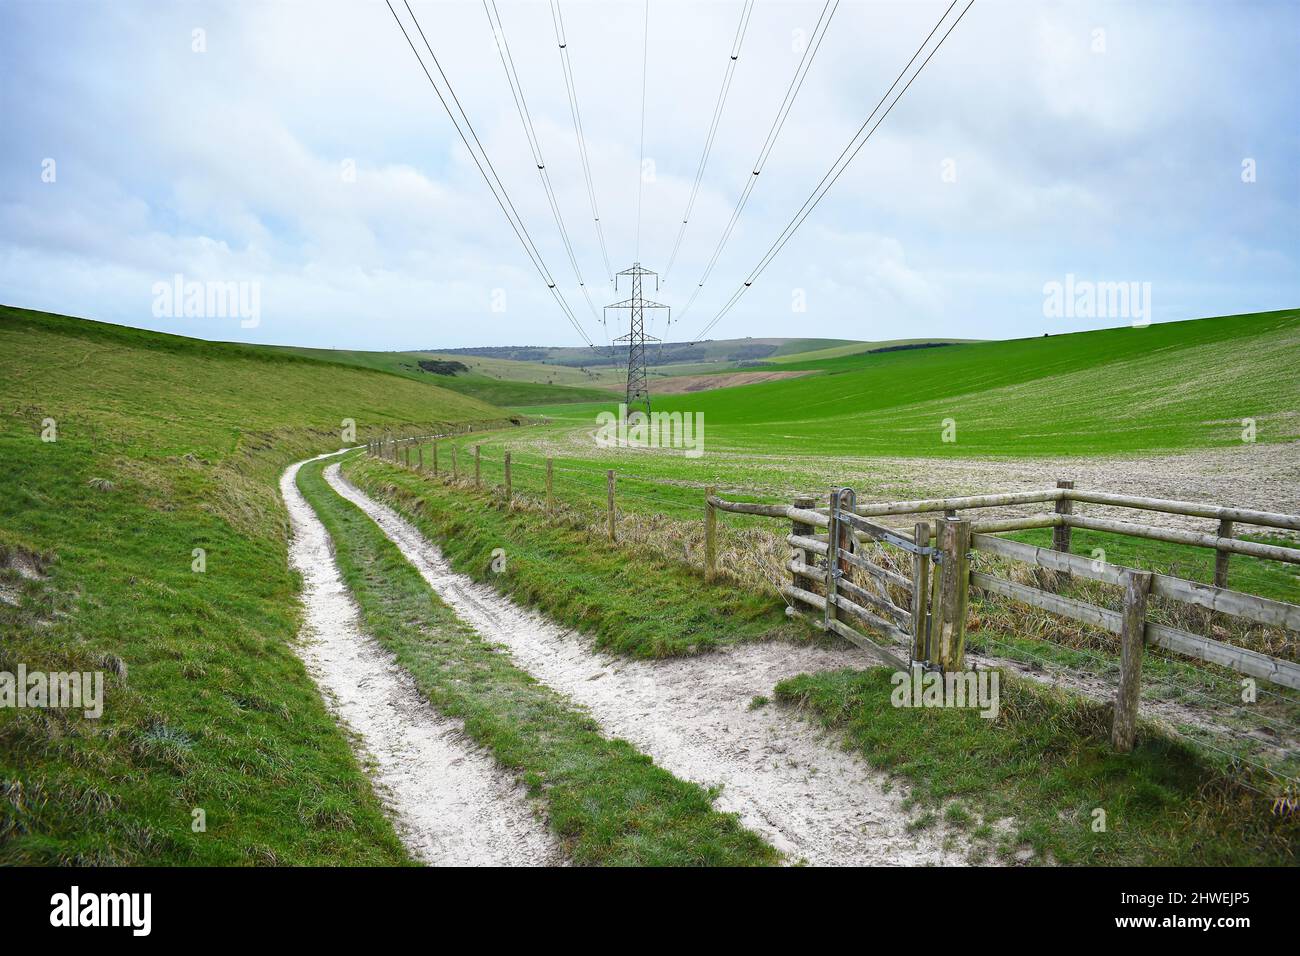 A rutted track next to a footpath gate runs into the distances underneath electric cables in the sky with a electricity pylon in the background. Stock Photo